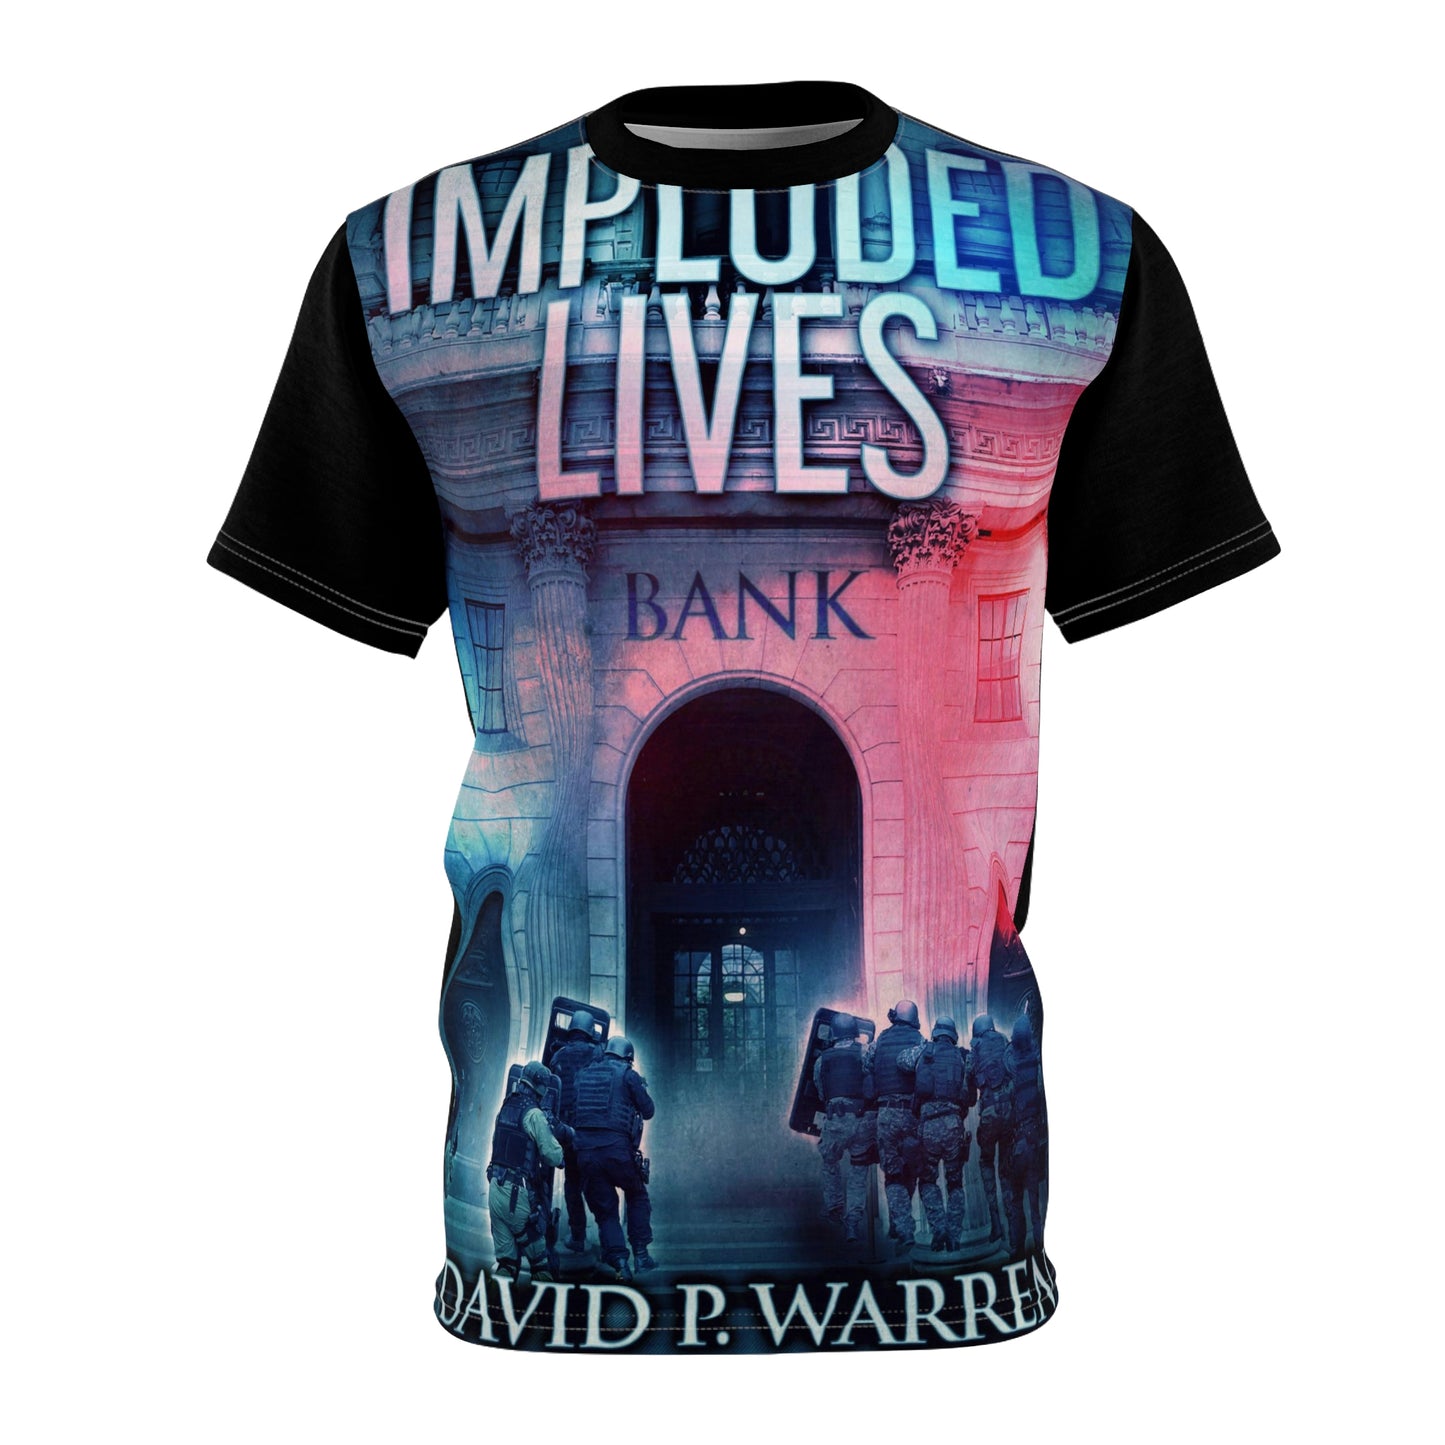 Imploded Lives - Unisex All-Over Print Cut & Sew T-Shirt